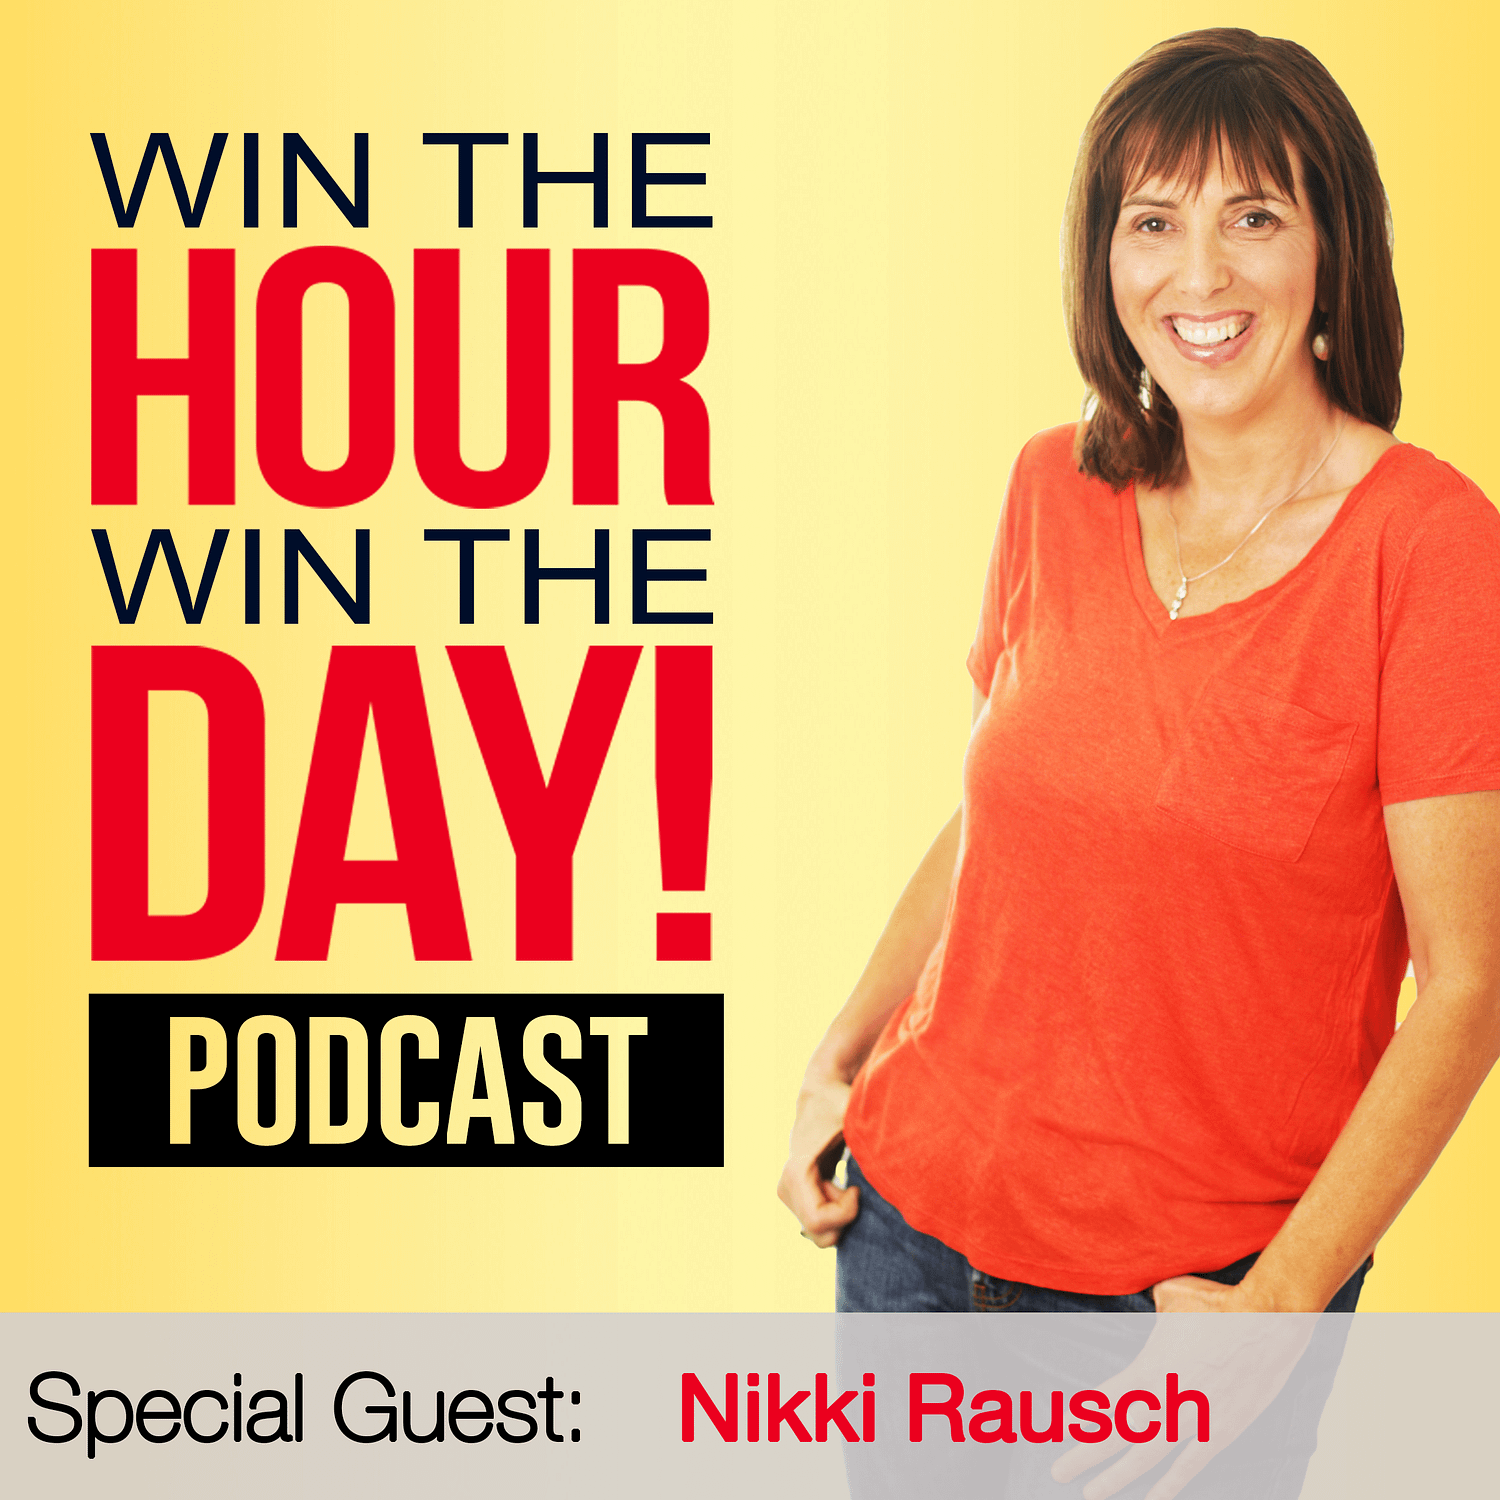 How To Easily Grow The Sales For Your Business! with Nikki Rausch